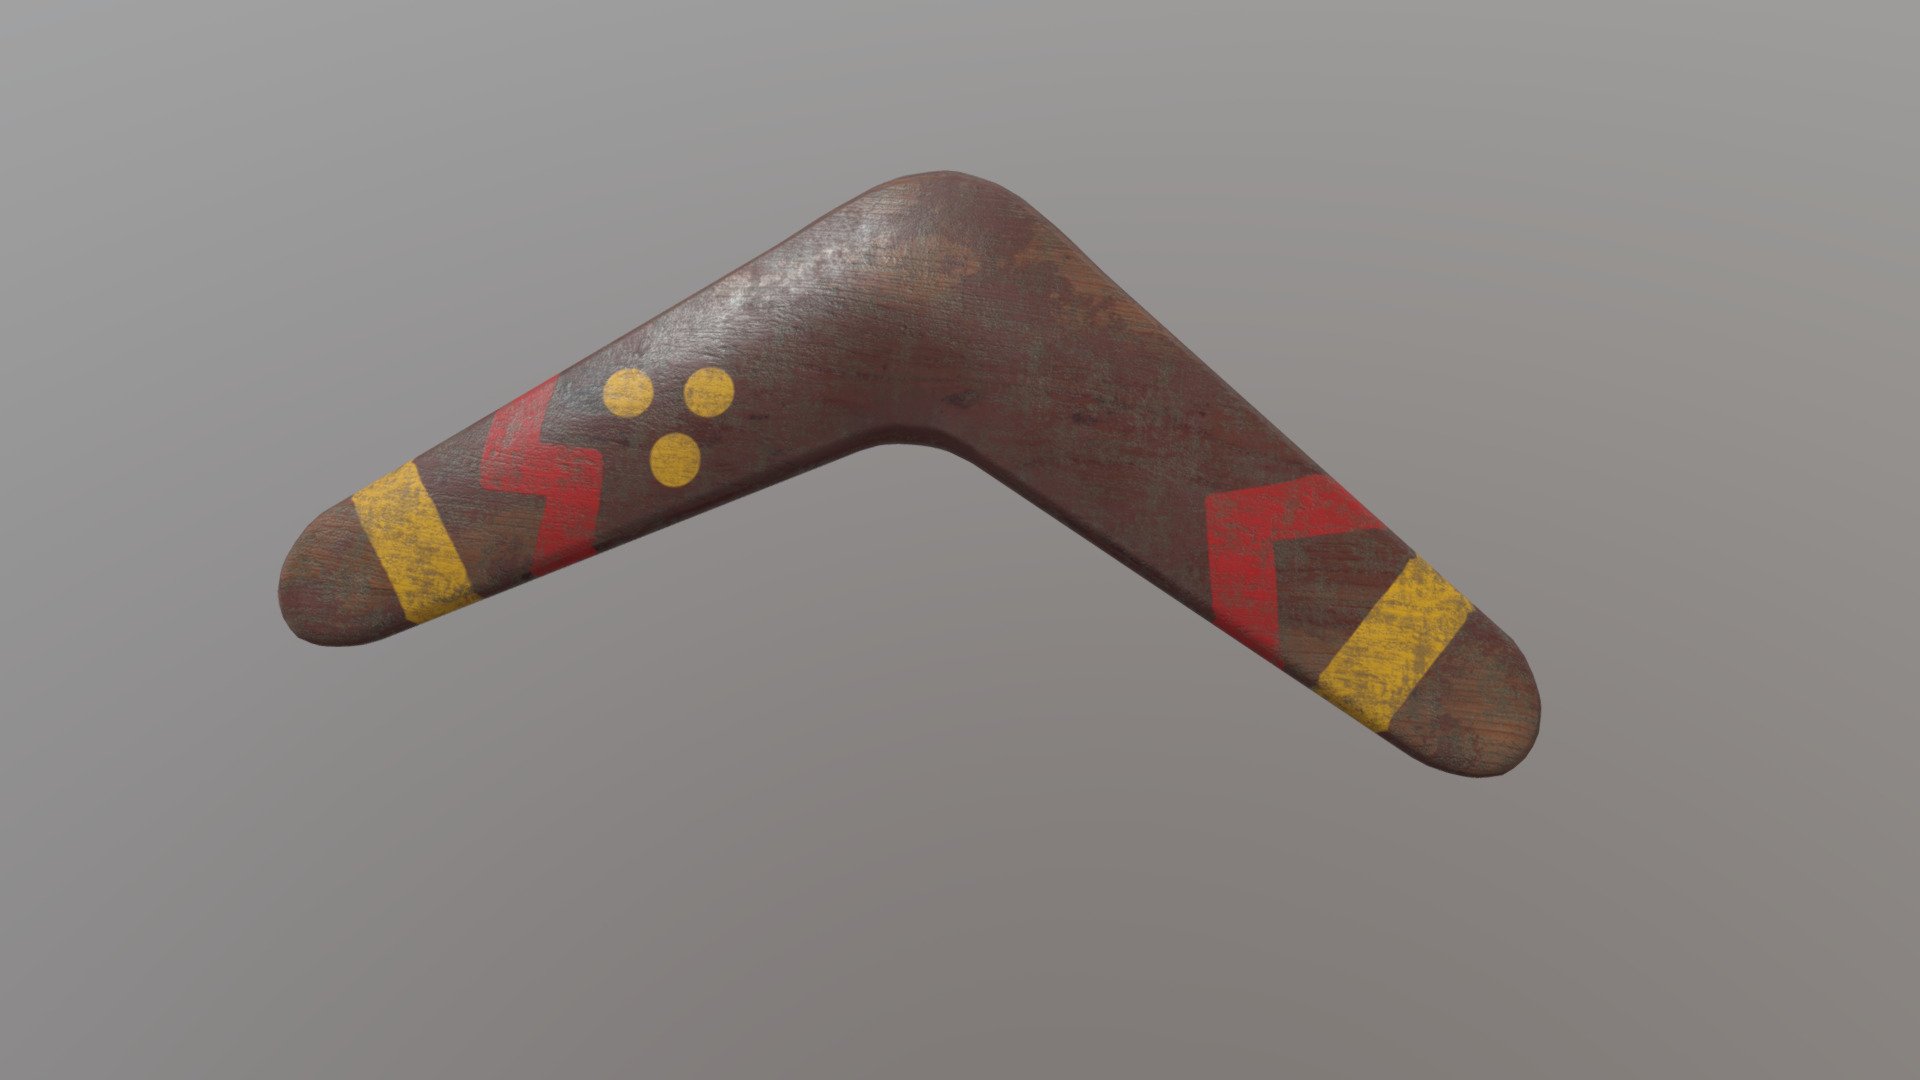 Made in Blender

Created to test Quixel Mixer, it has a lot of potential! - Ty the Tasmanian Tiger - Boomerang - 3D model by Jedi Roman (@jedibroman) 3d model